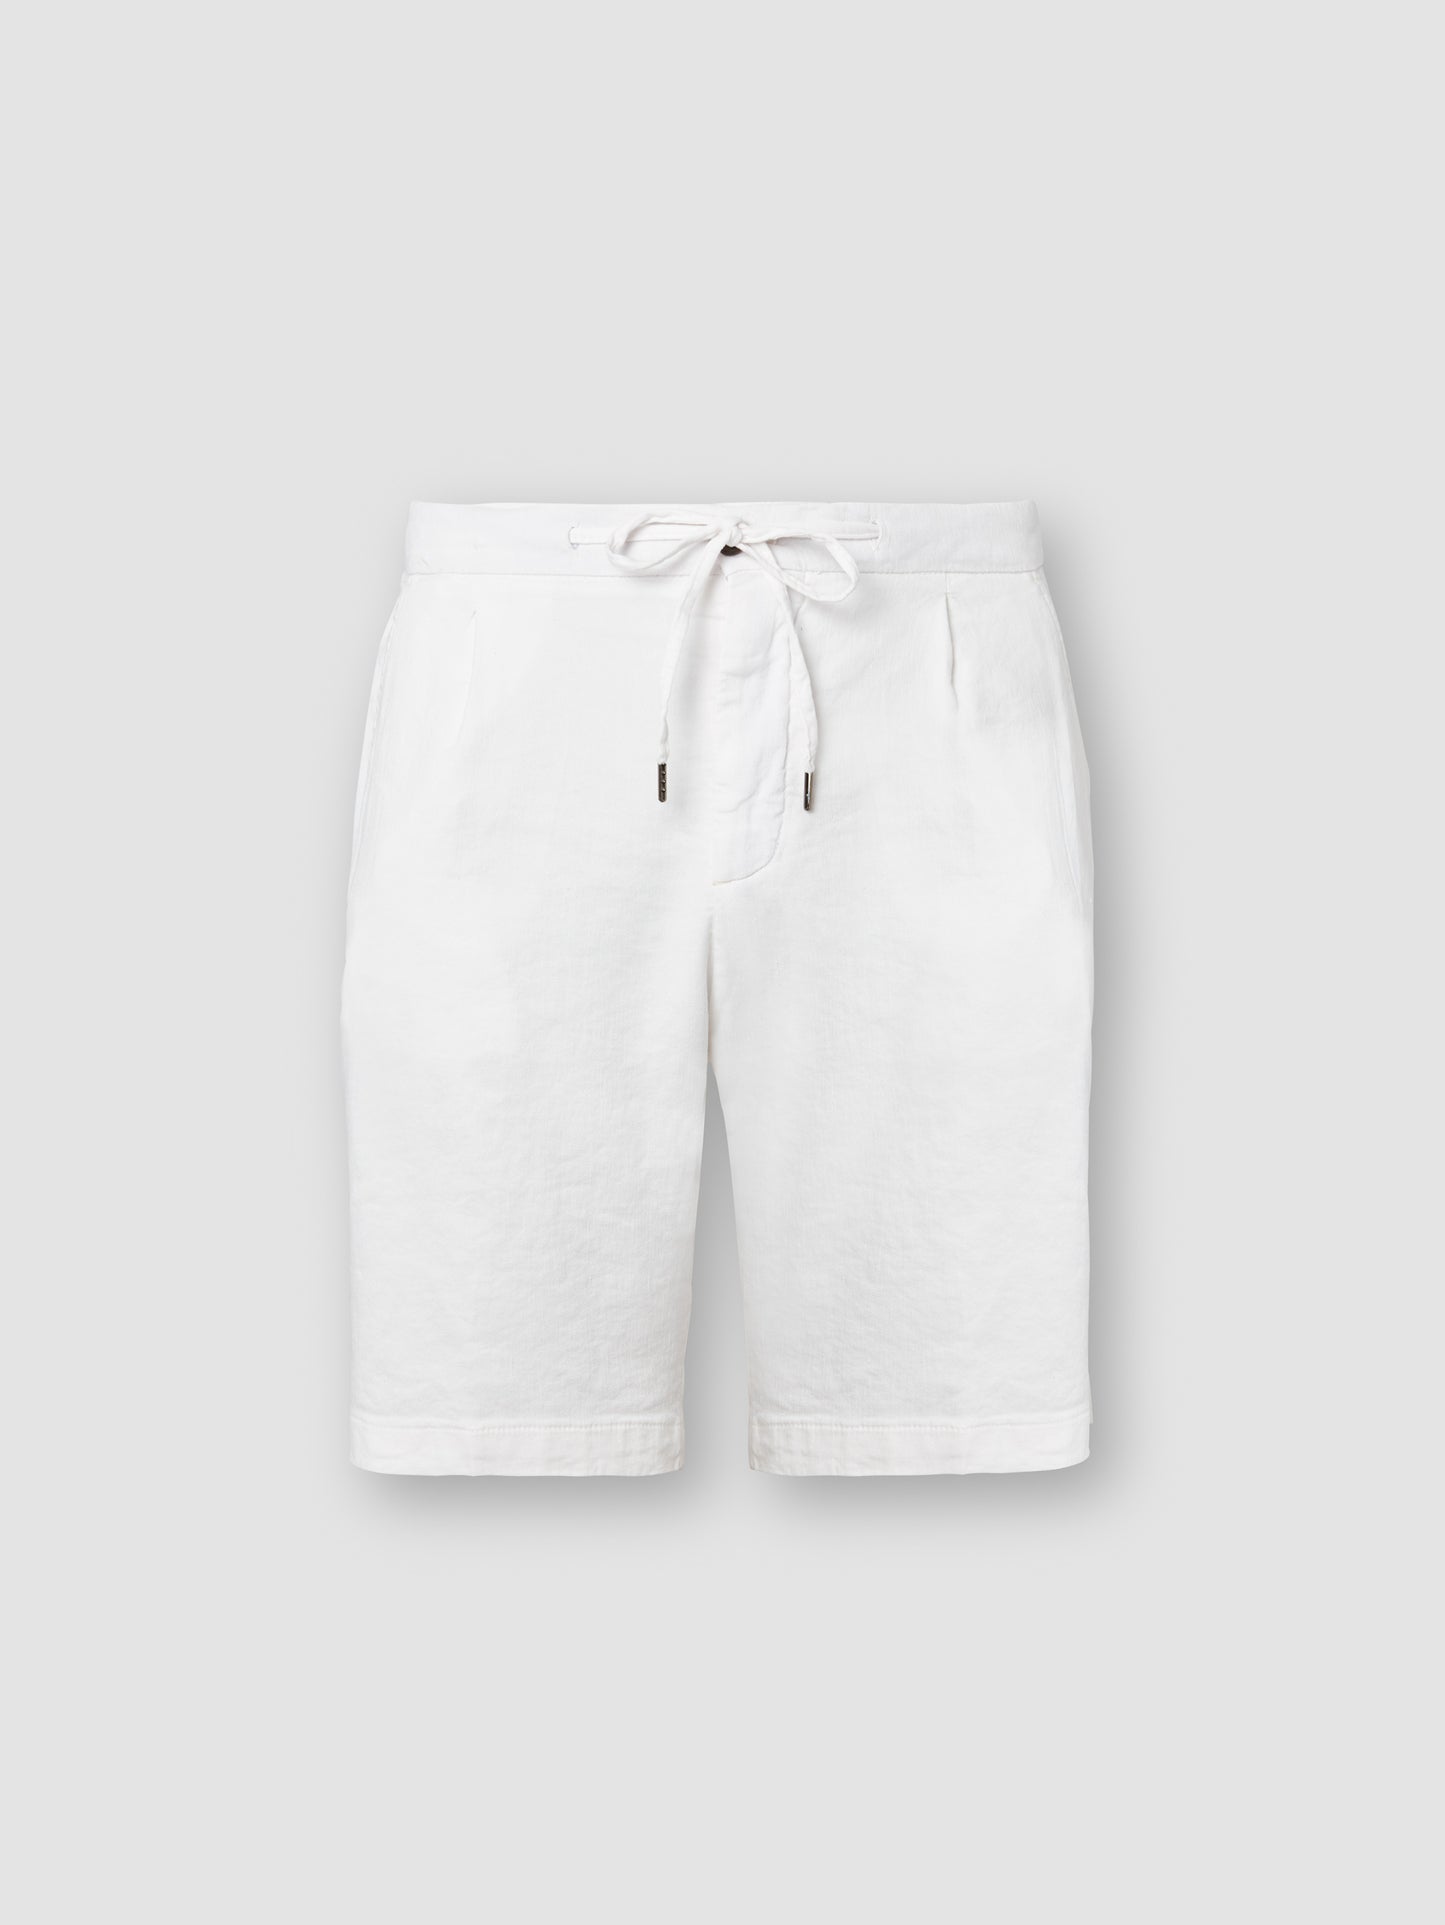 Linen Jersey Pleated Shorts White Product Image